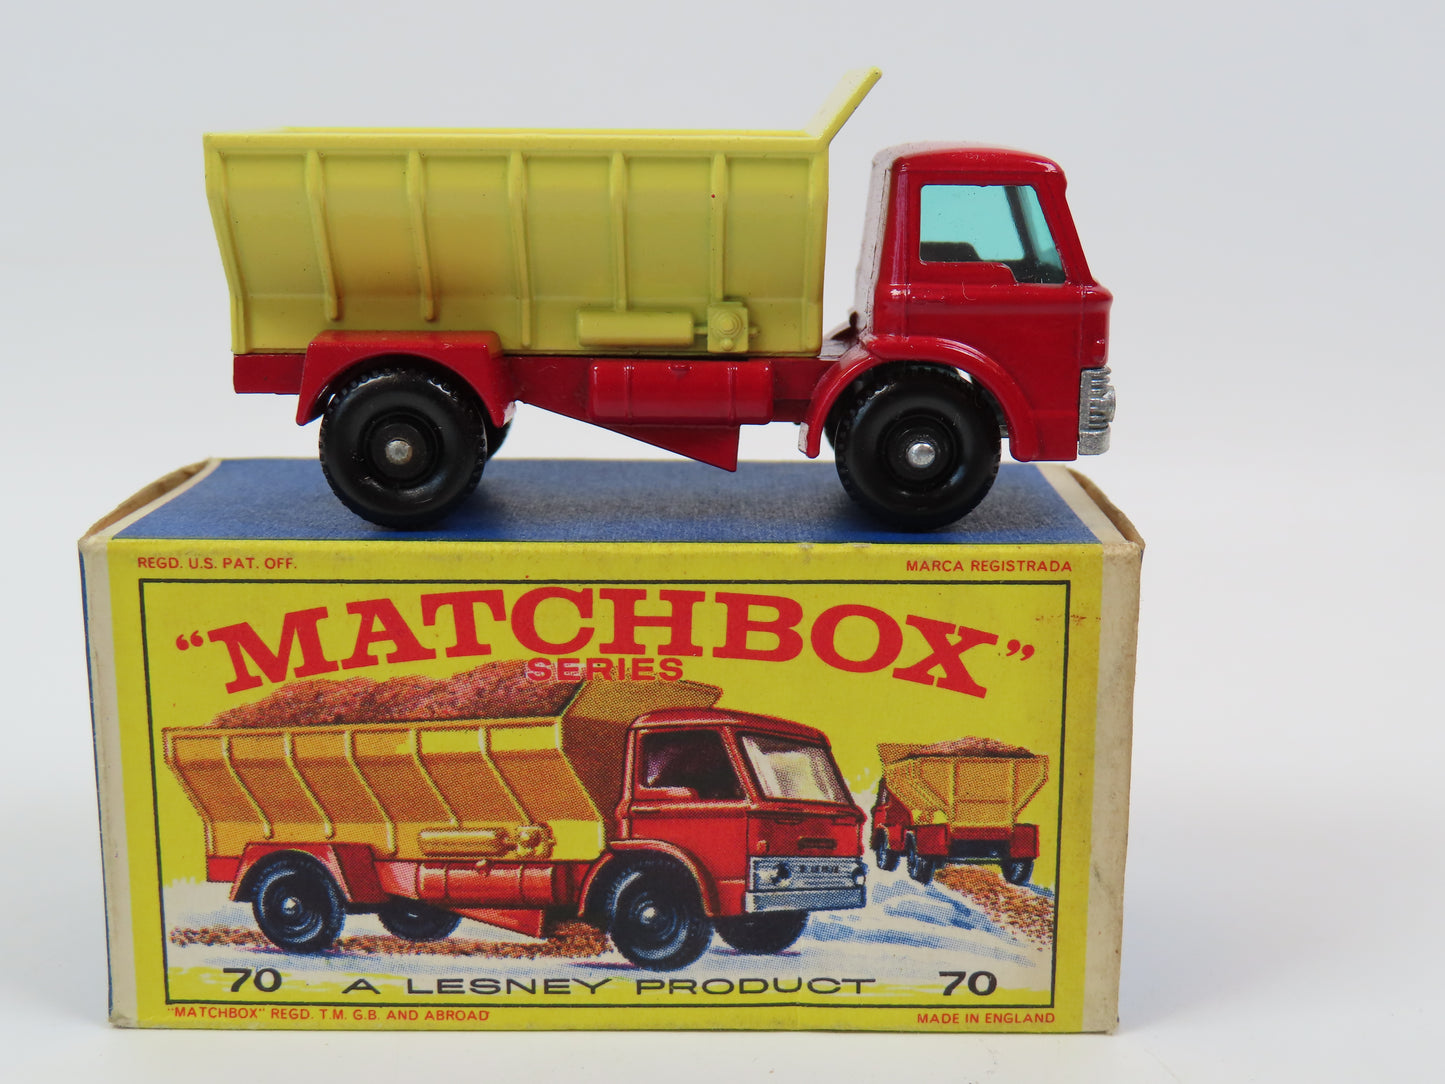 Matchbox 70 Grit-Spreading Truck, Very Near Mint/Boxed!